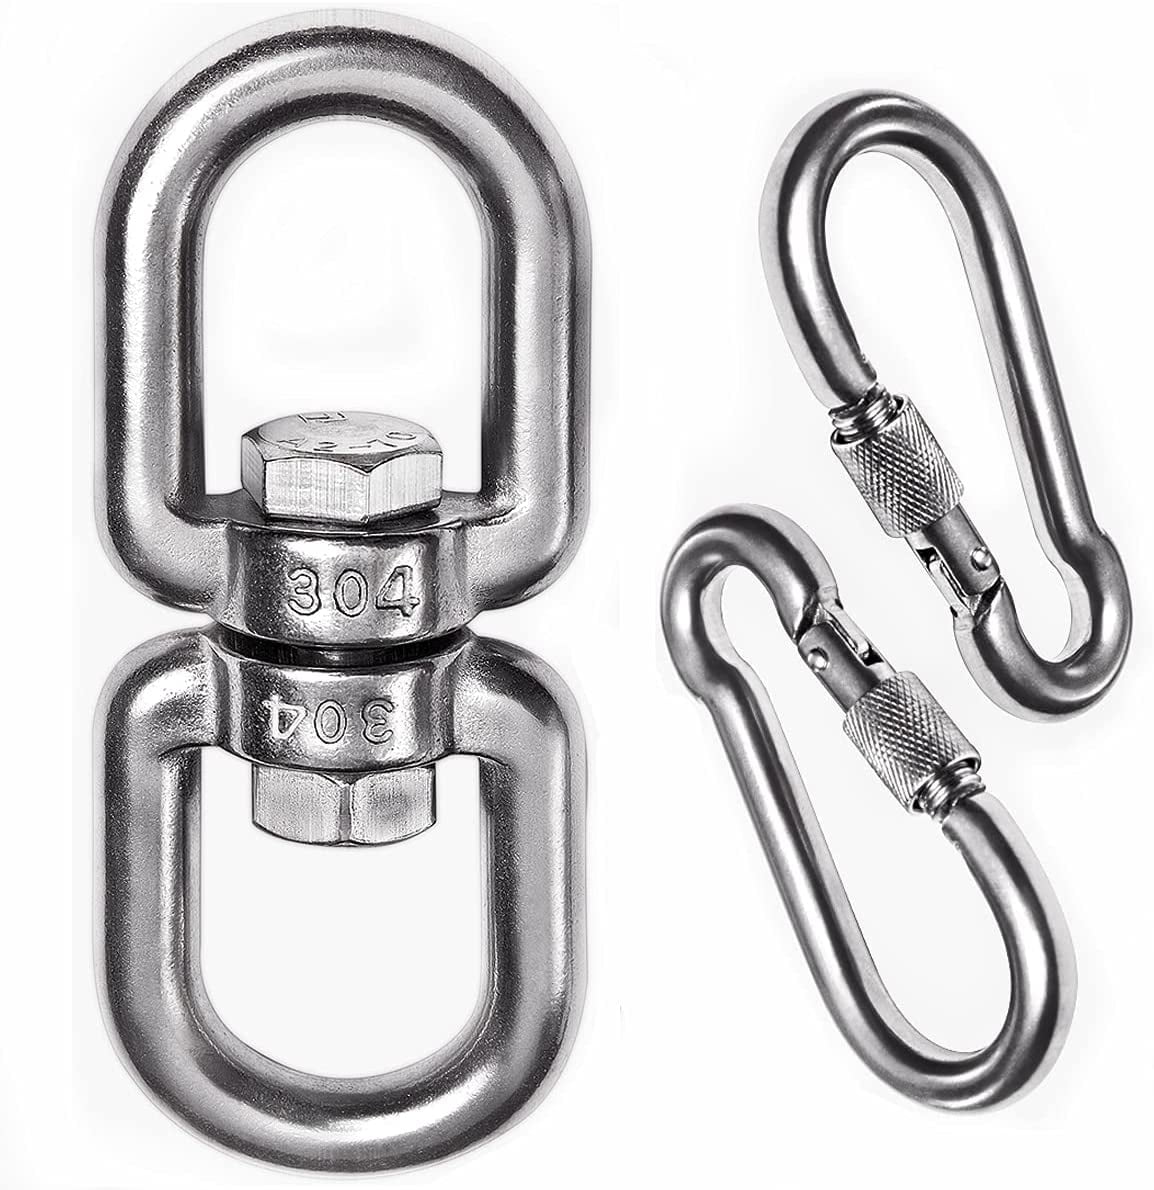 Jingyi Swivel Eye Snap Hook Stainless Steel 4 Sizes from 11/16 to  7/8(#0,#1,#2,#3)